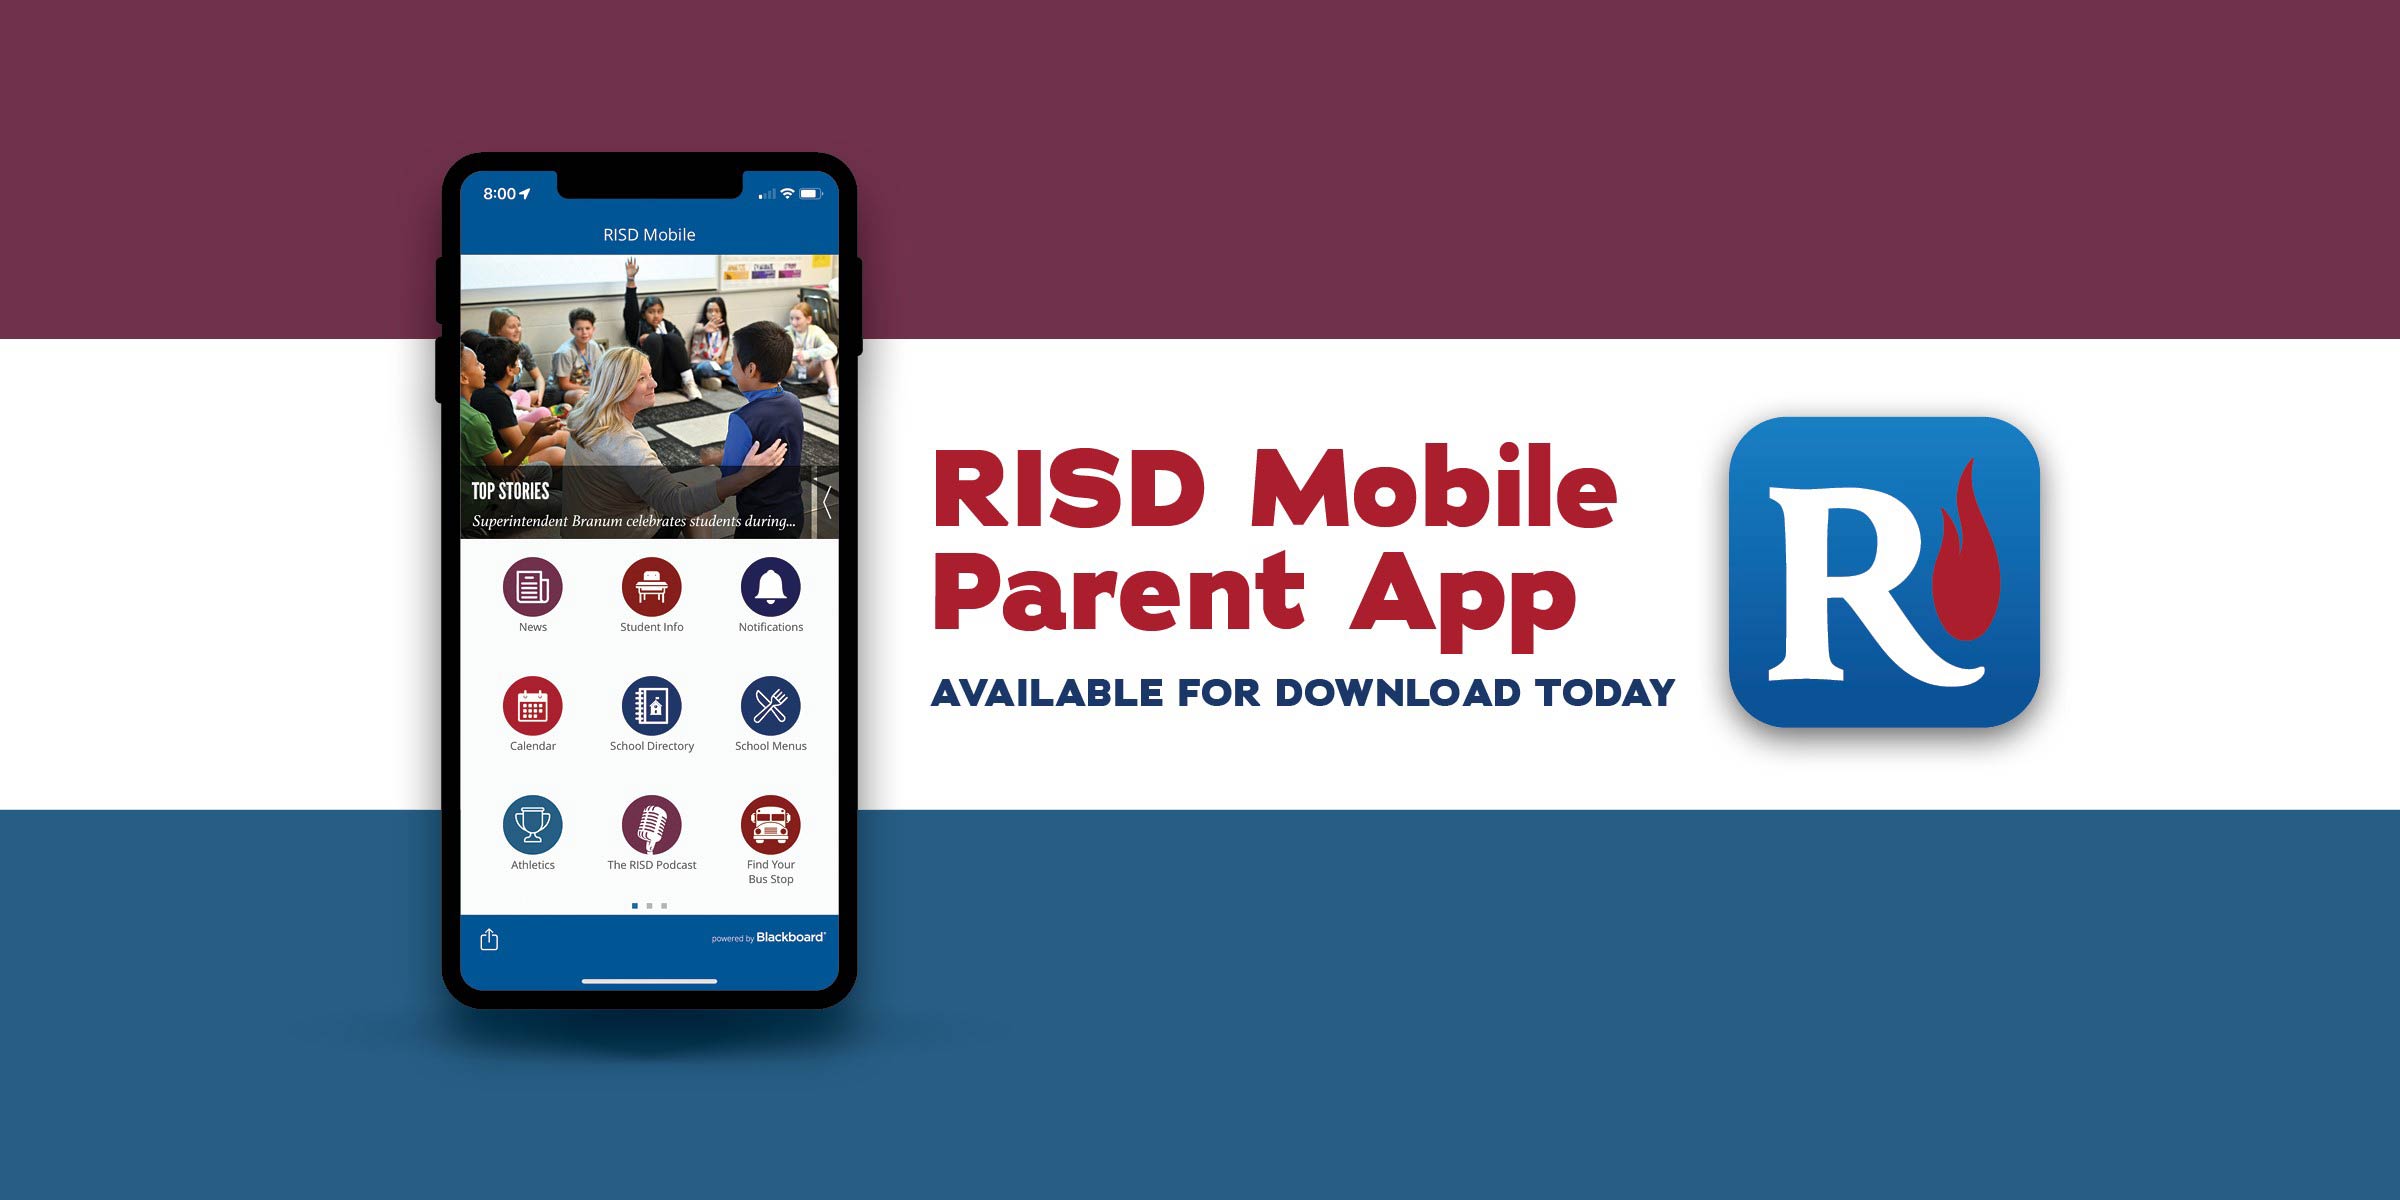 RISD Mobile Parent App Available for download today